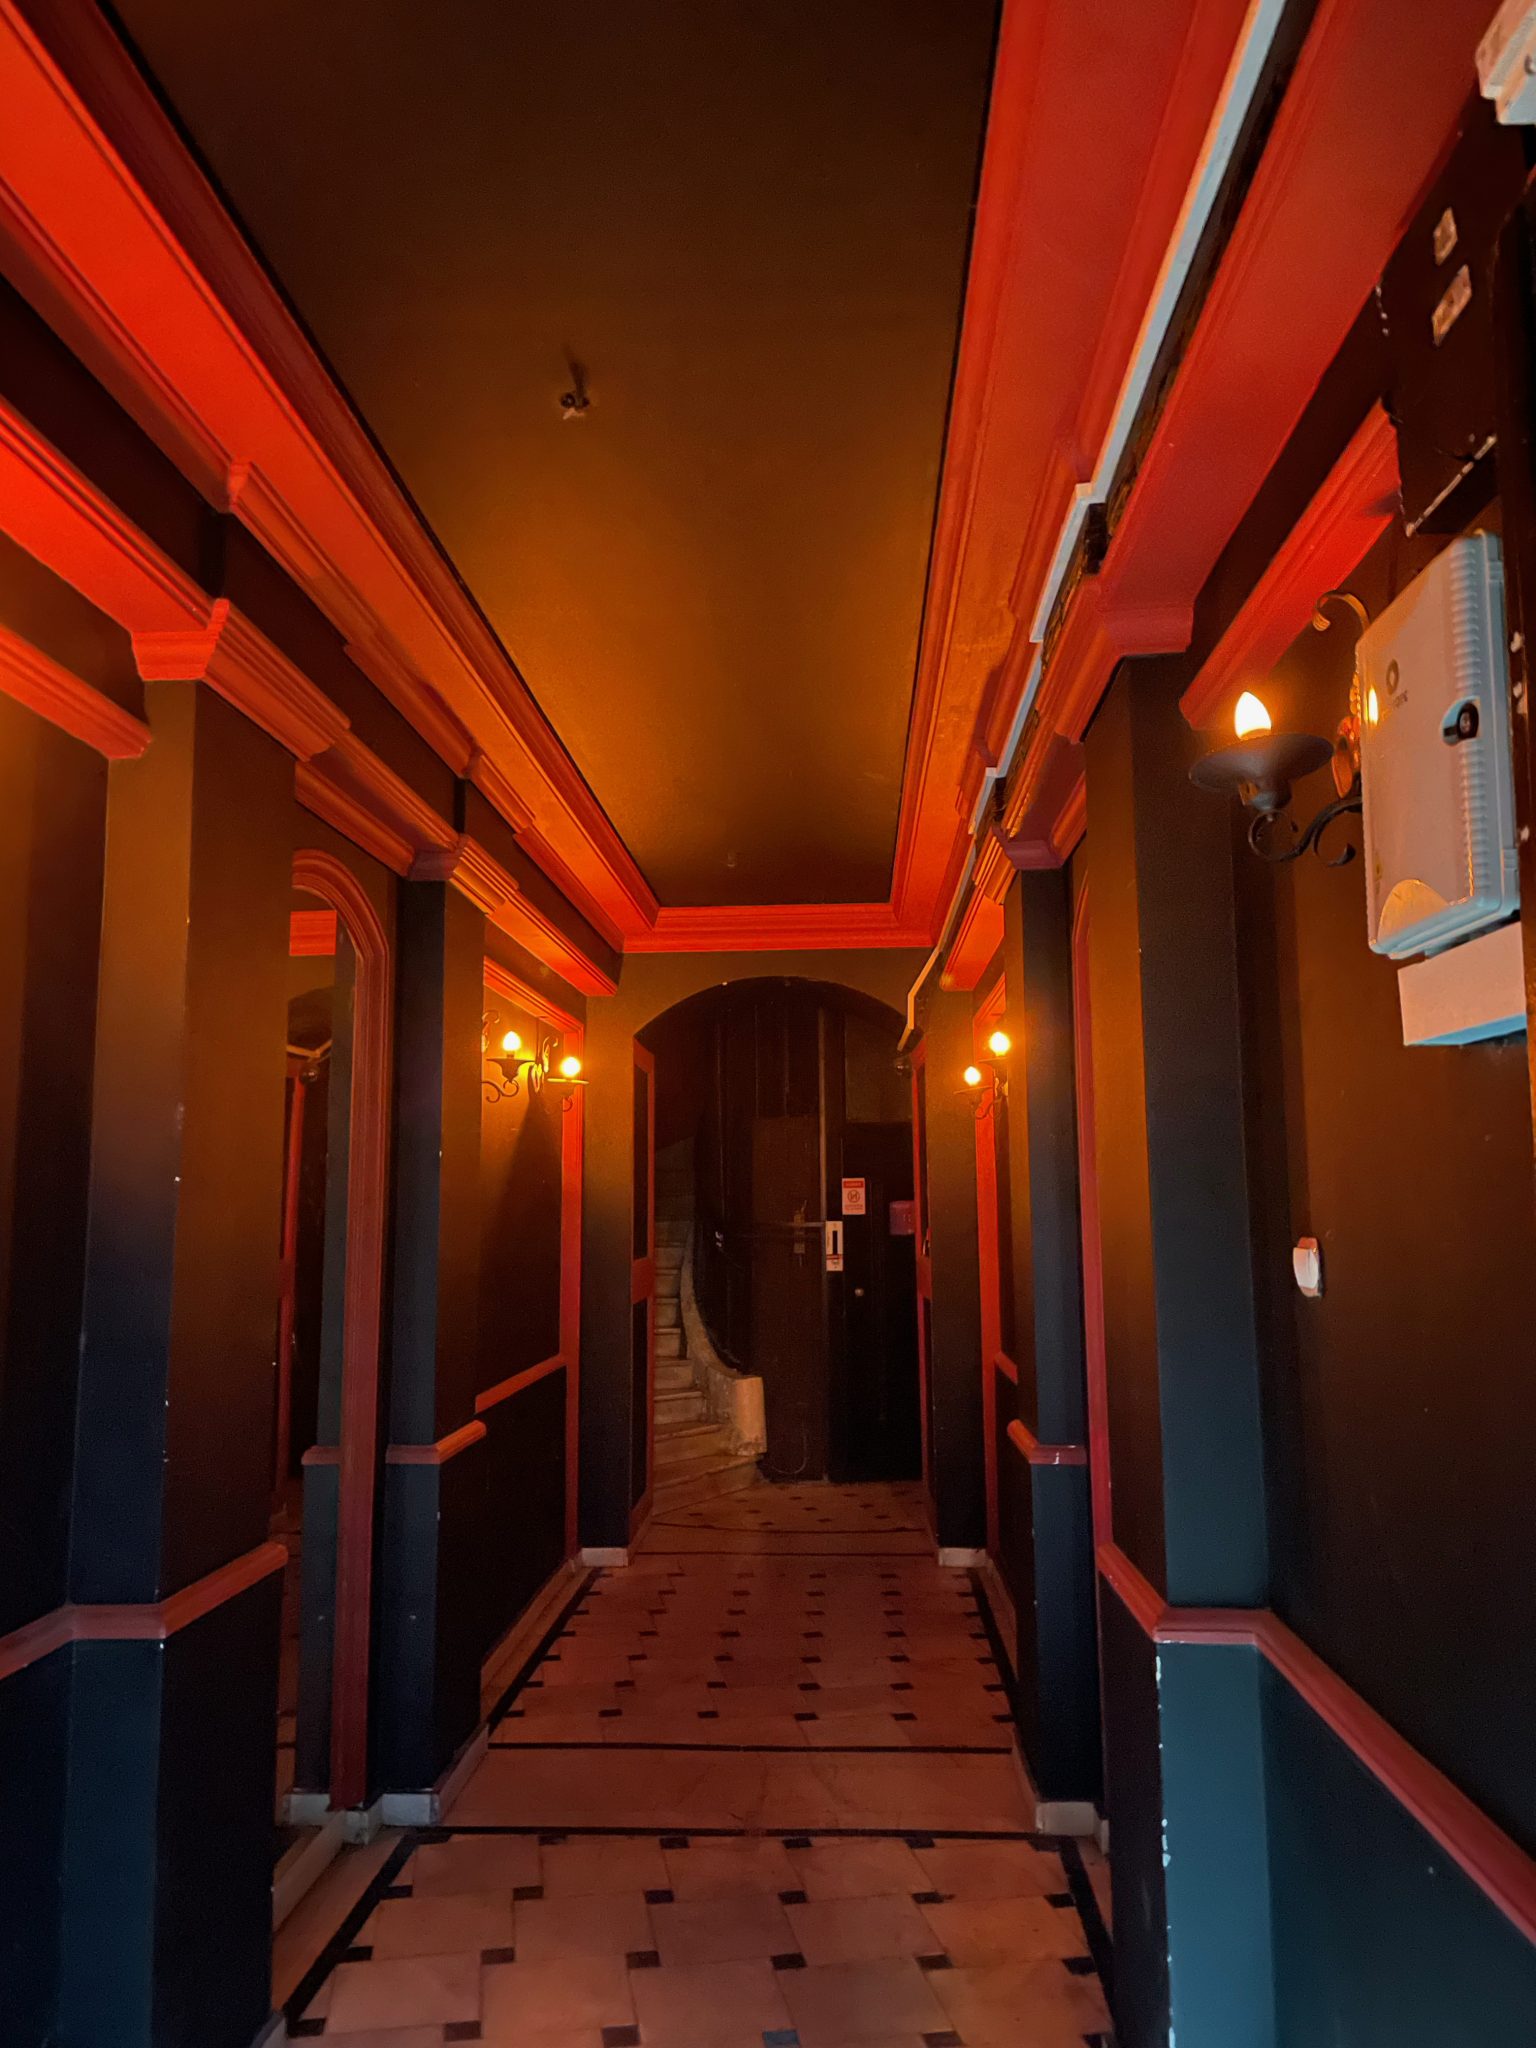 A corridor with red lights in Thessaloniki, Greece